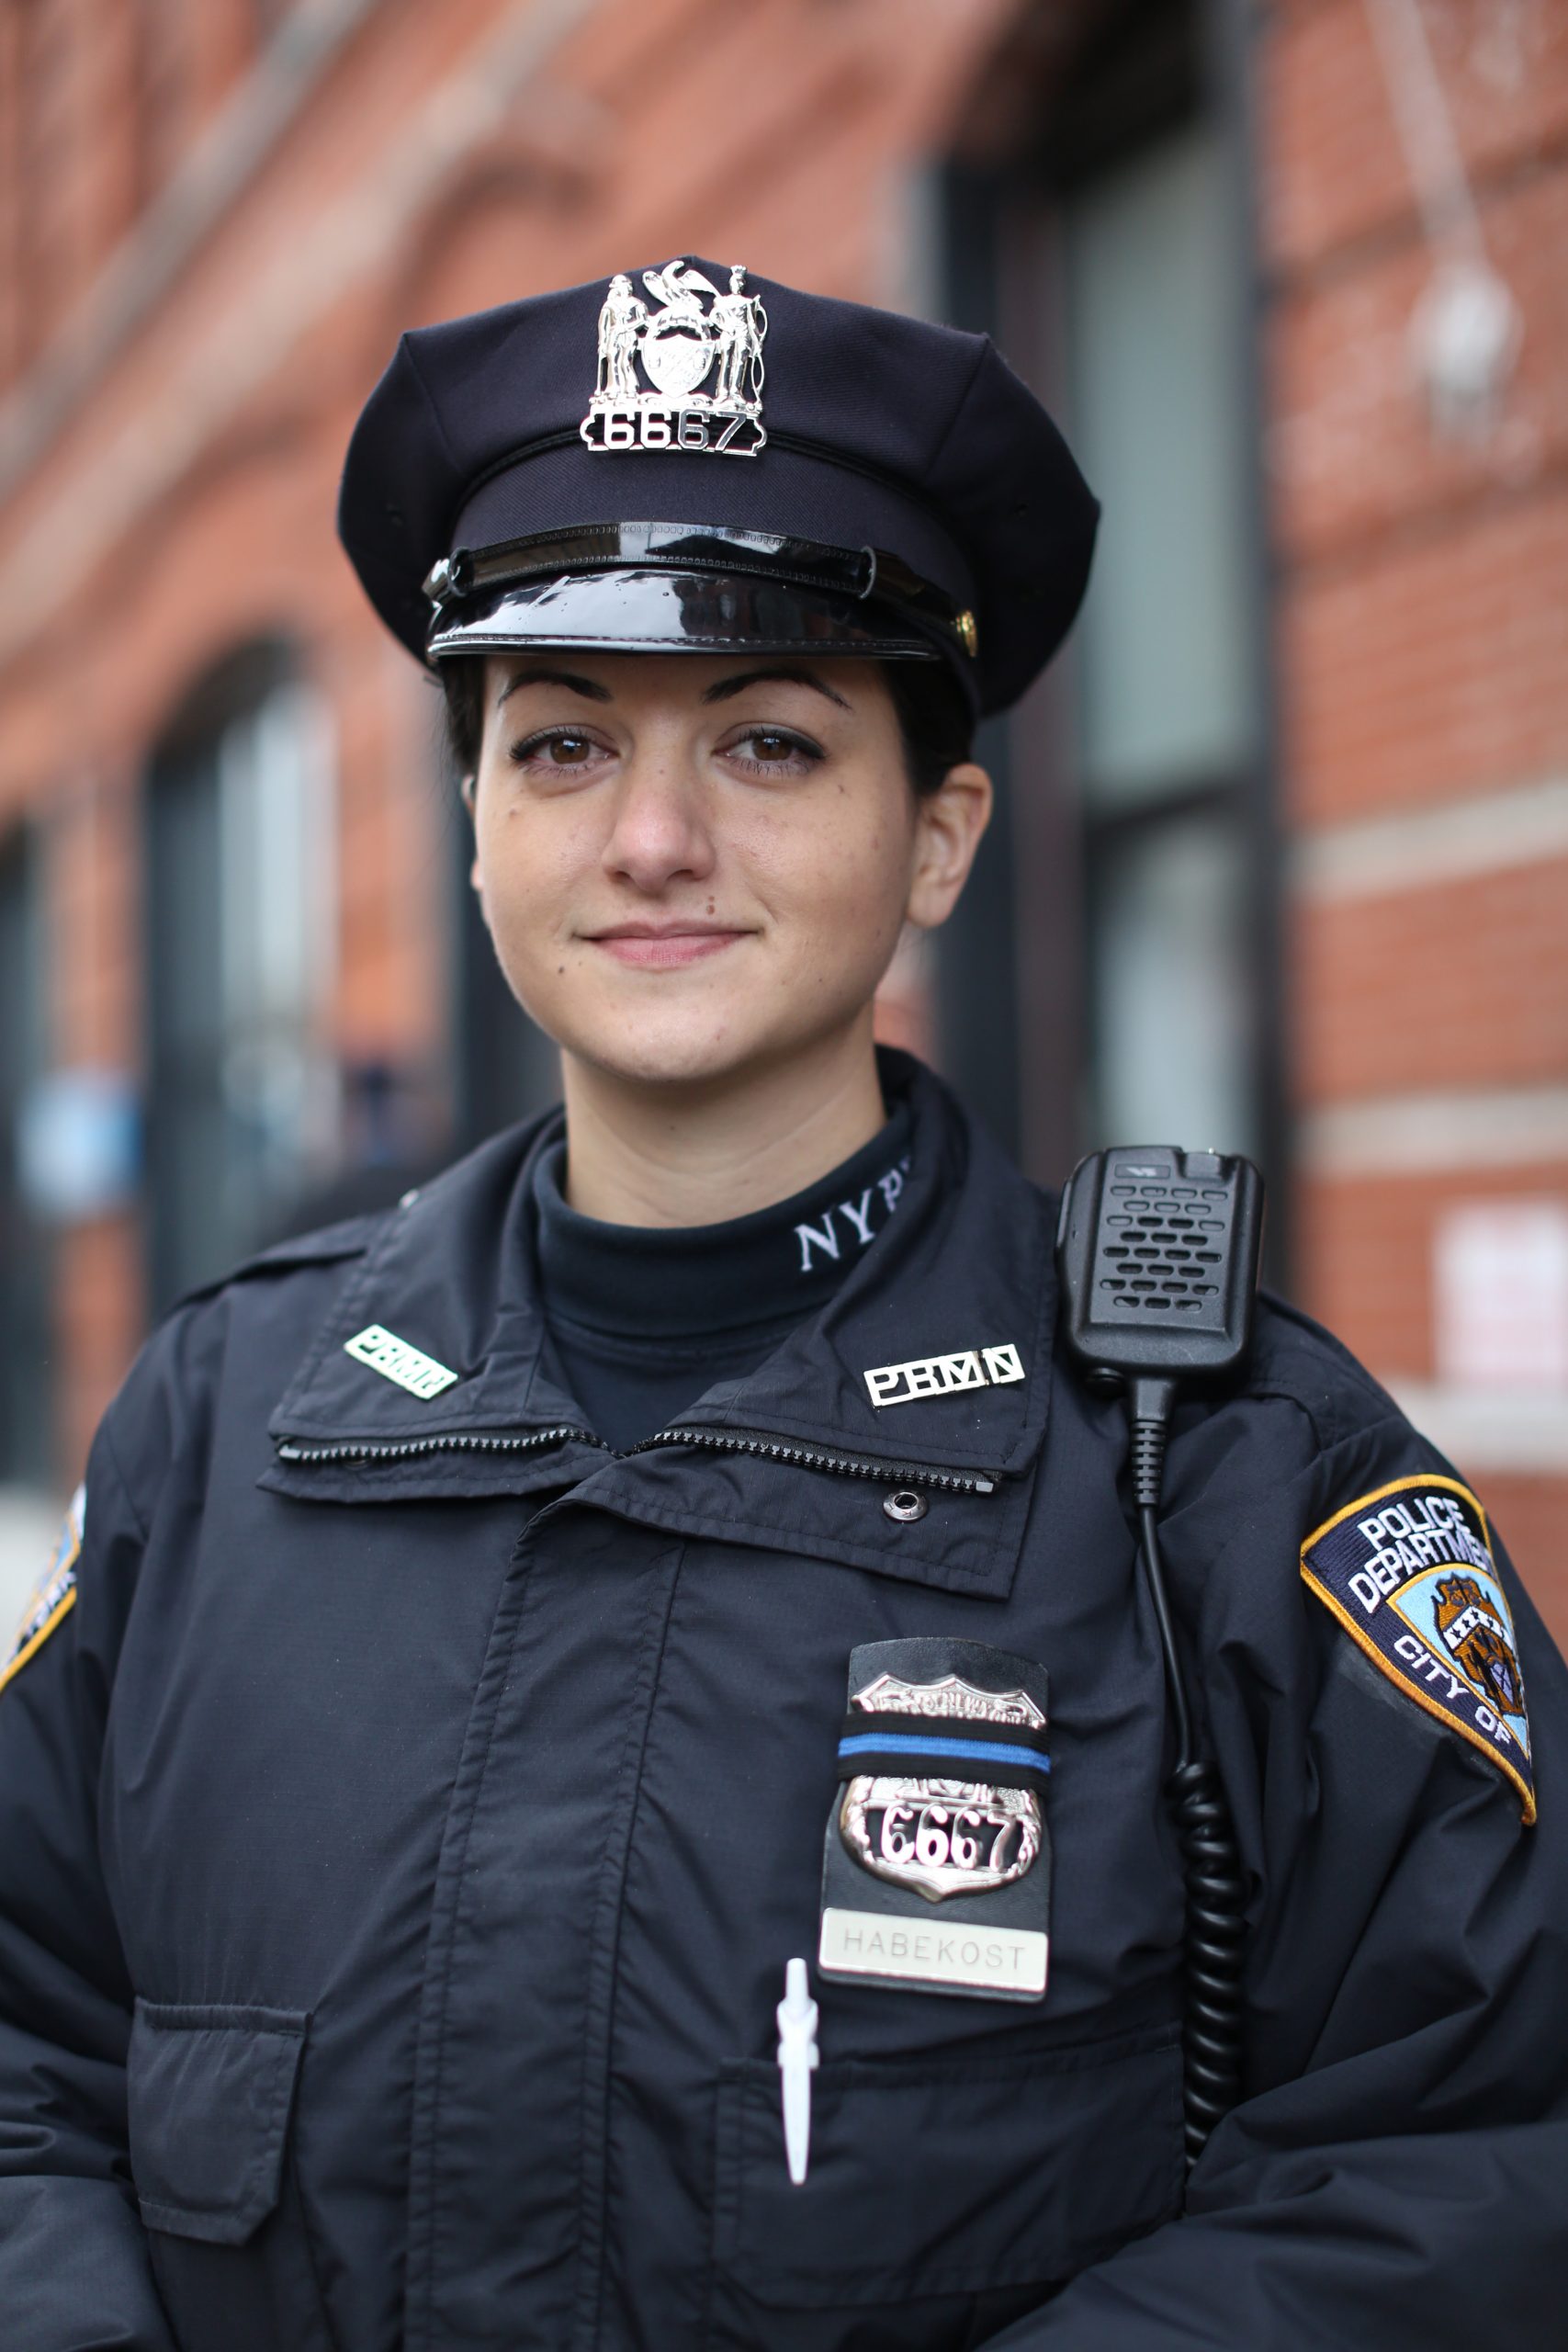 Meet Police Officer Kelly Habekost